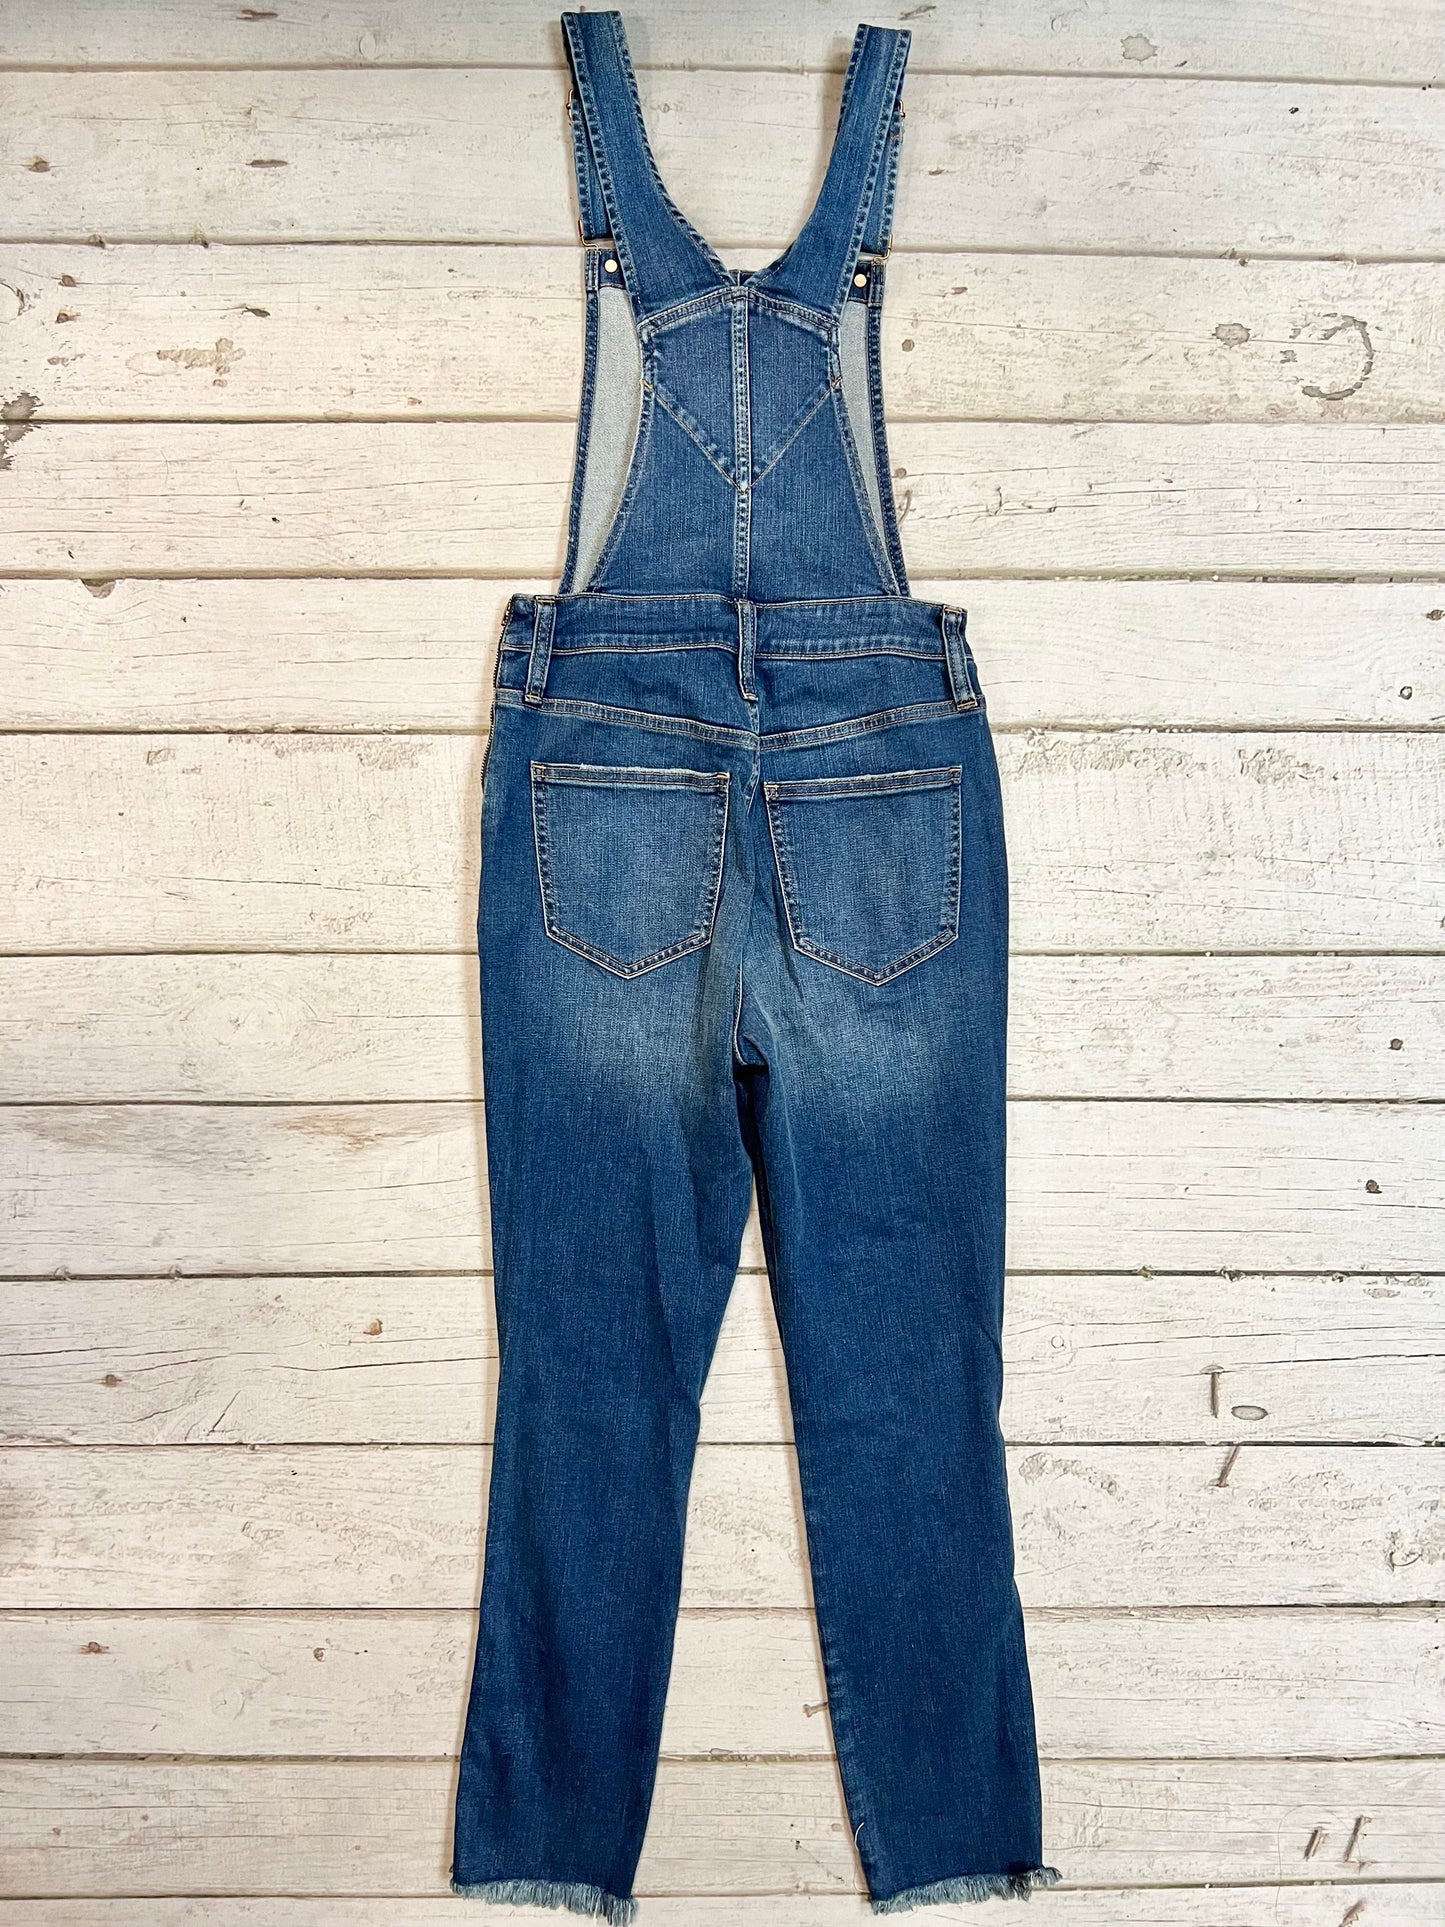 Overalls By Madewell  Size: S